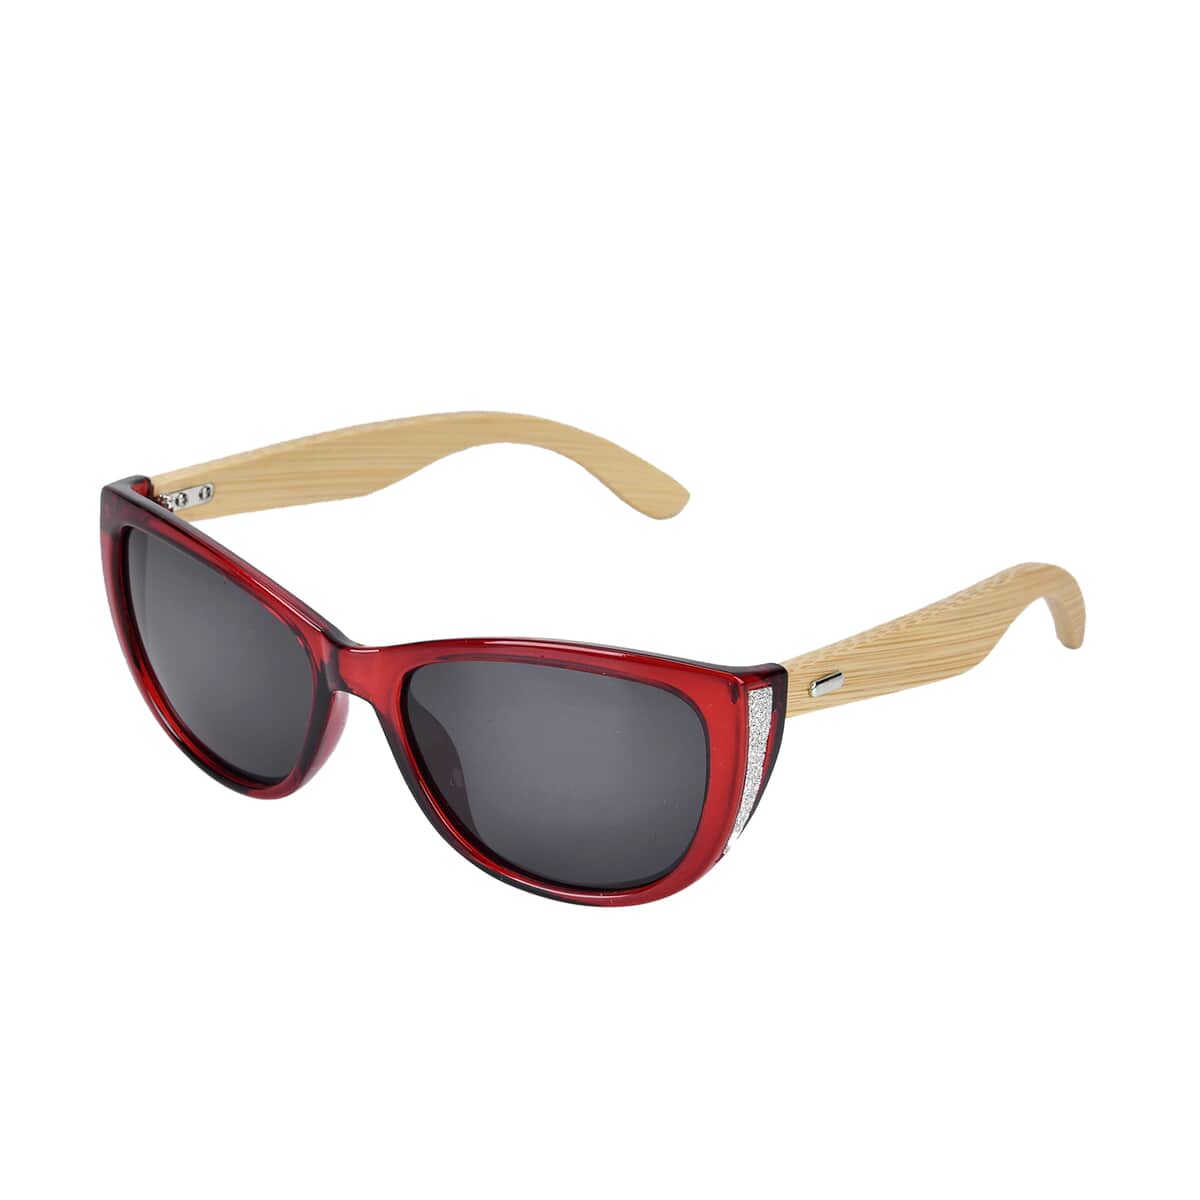 UV400 and Polarized PC Sunglasses with Bamboo Temples, Pouch and Case image number 2